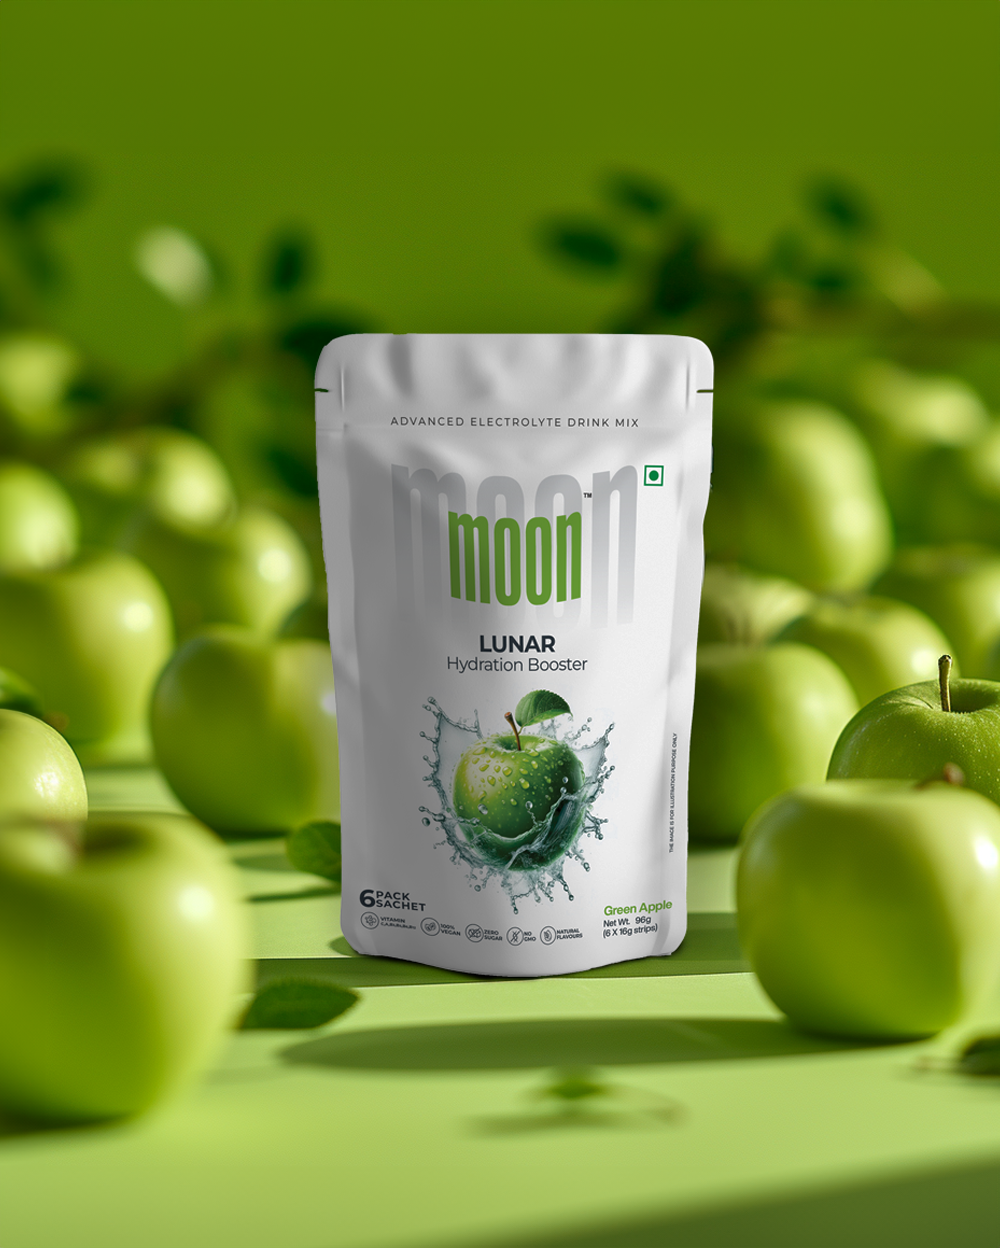 A packet of Moon Lunar Green Apple Hydration Booster electrolyte drink mix on a background of Green Apple.